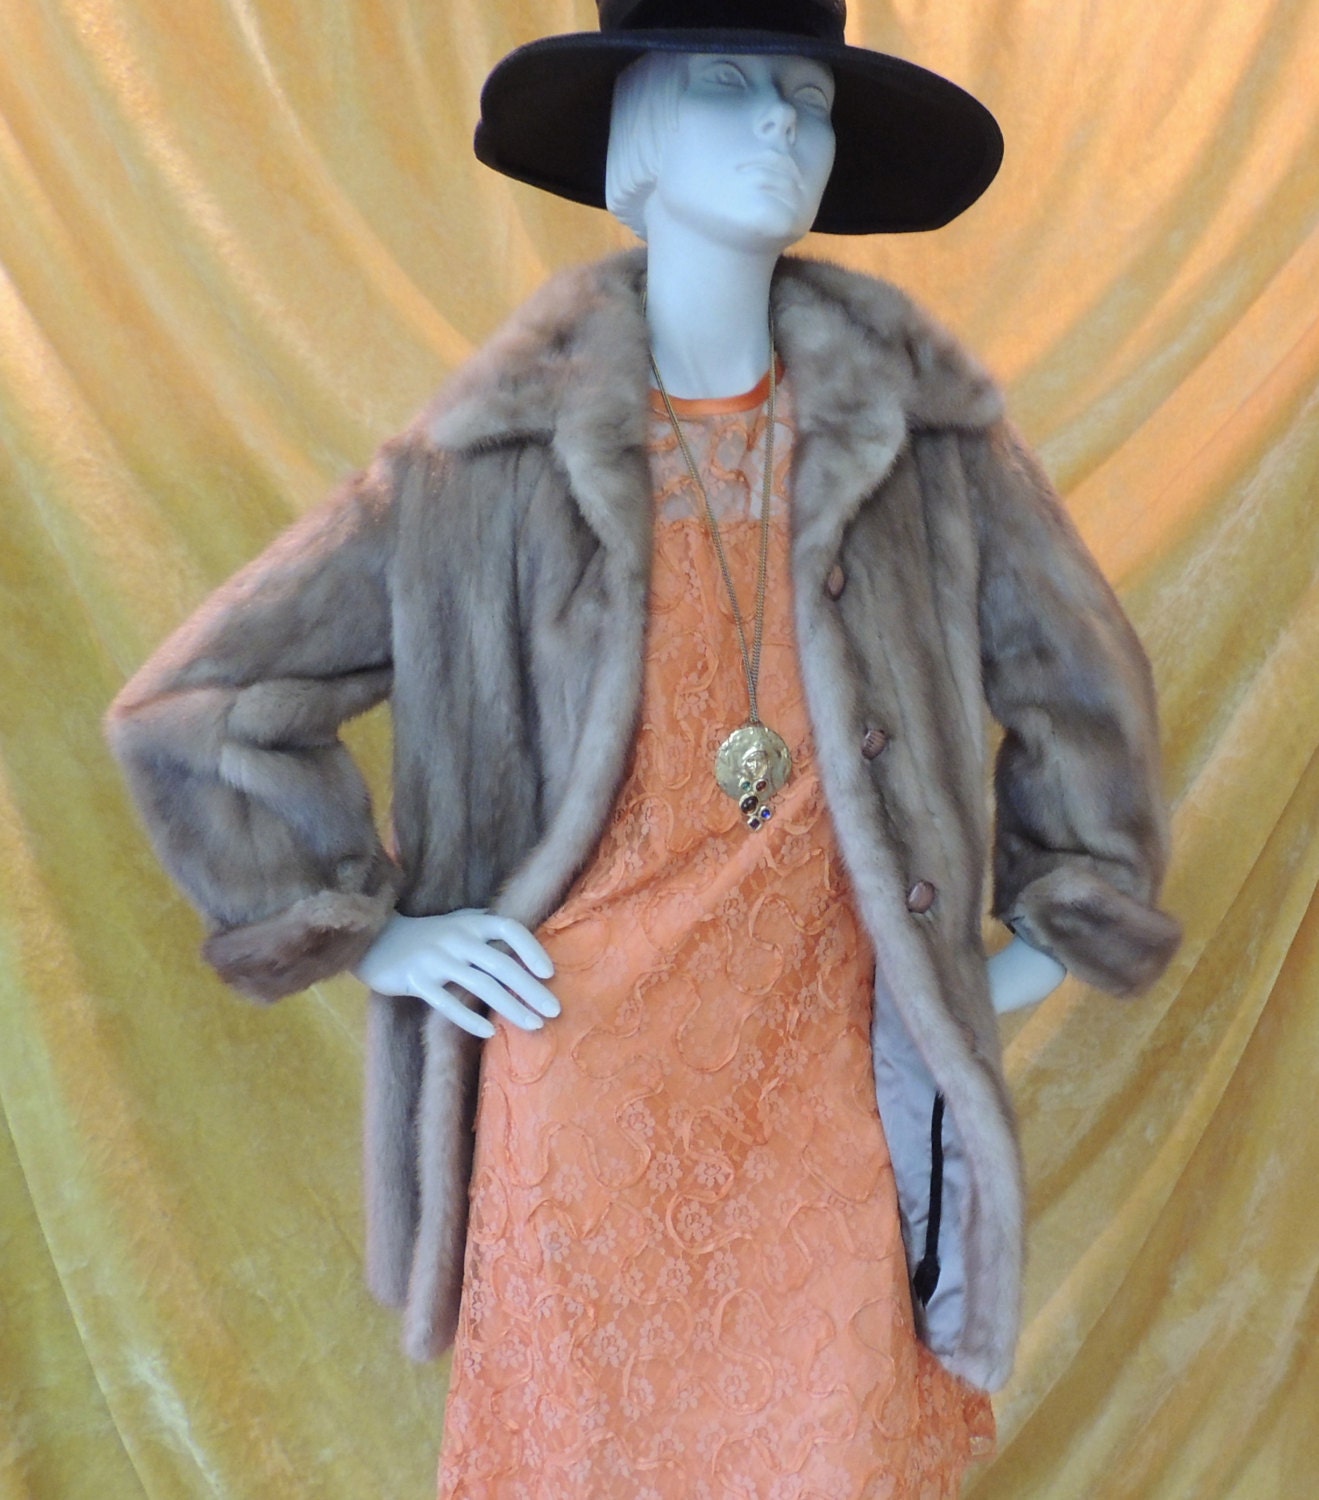 Classic Pastel Brown Mink Fur Coat Stroller Jacket S Fast Shipping